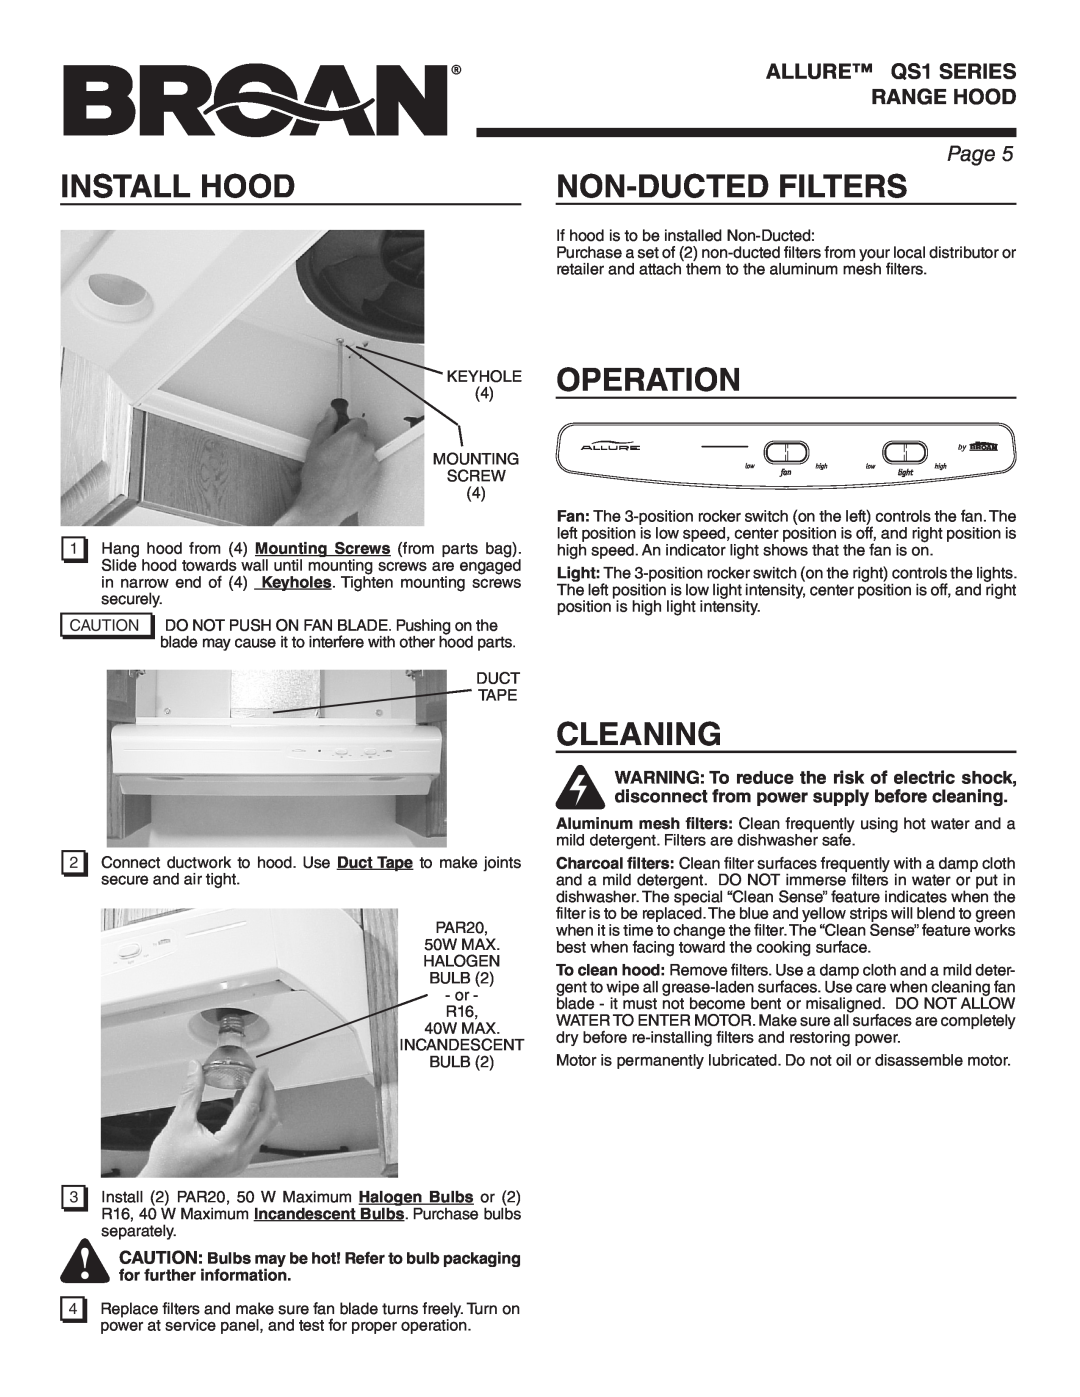 Broan QS130BL warranty Install Hood, Non-Ducted Filters, Operation, Cleaning, ALLURE QS1 SERIES RANGE HOOD, Page 